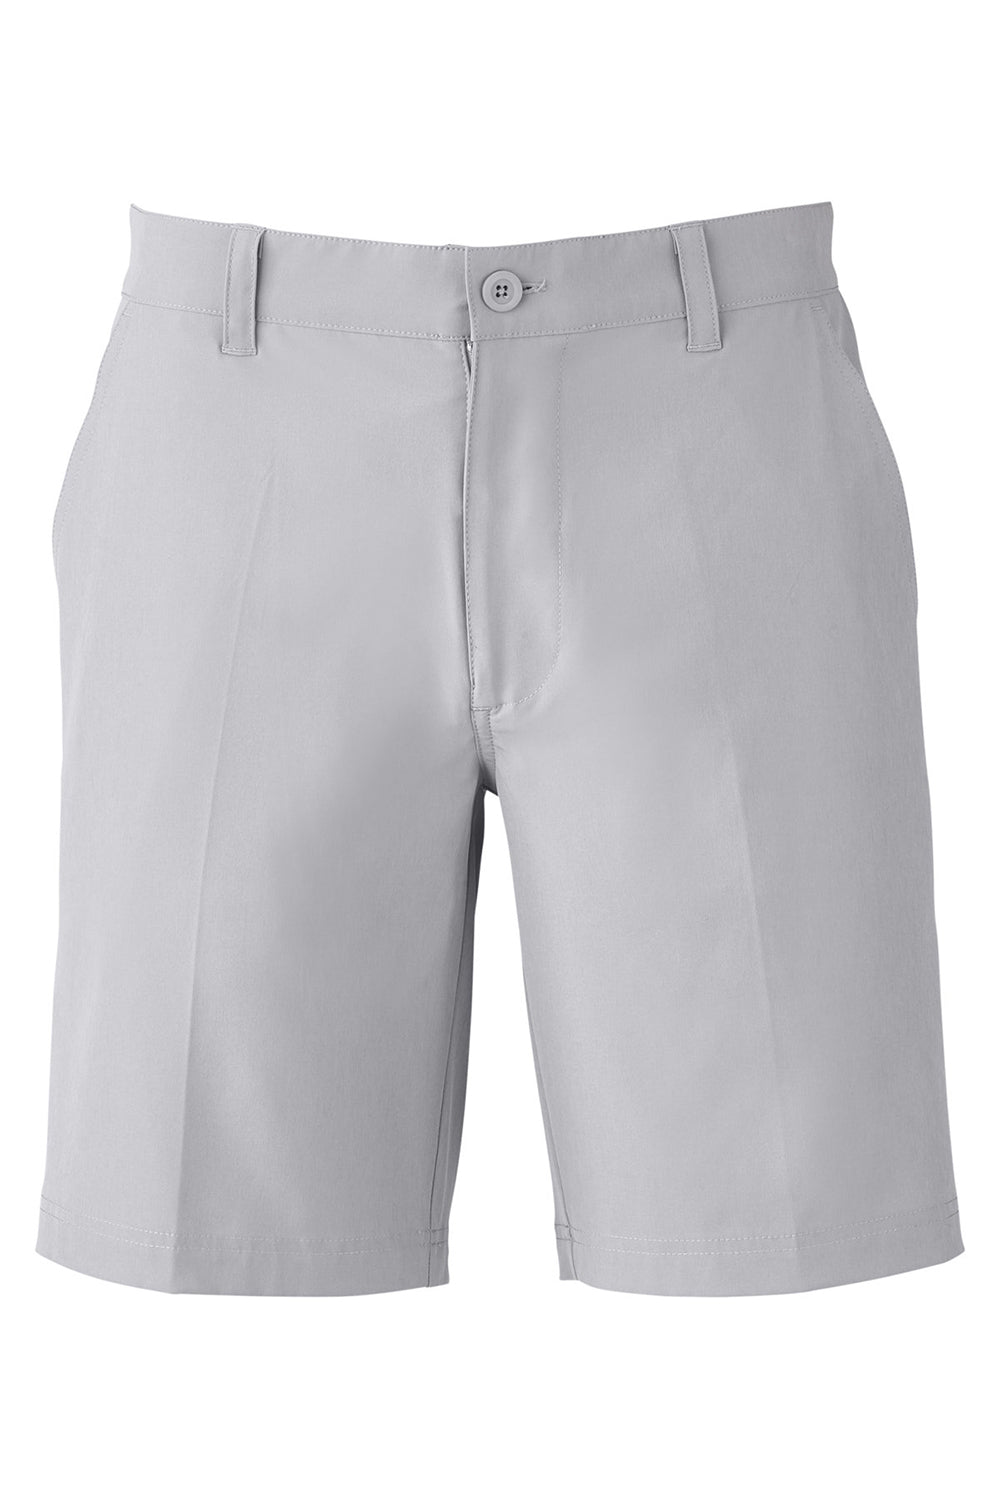 Swannies Golf SWS700 Mens Sully Shorts w/ Pockets Grey Flat Front